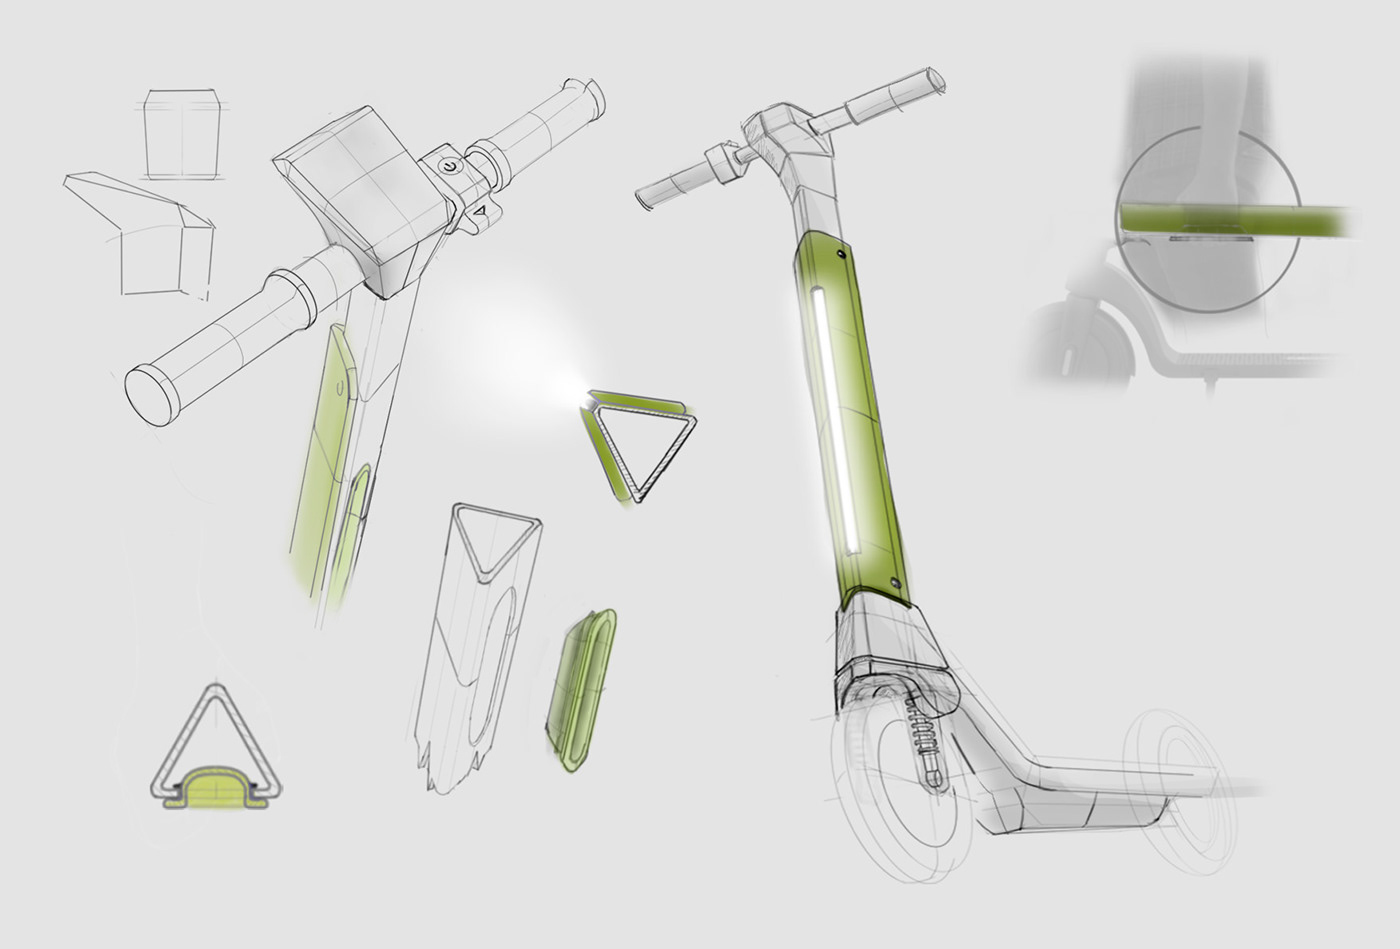 Sketching ideas for a scooter